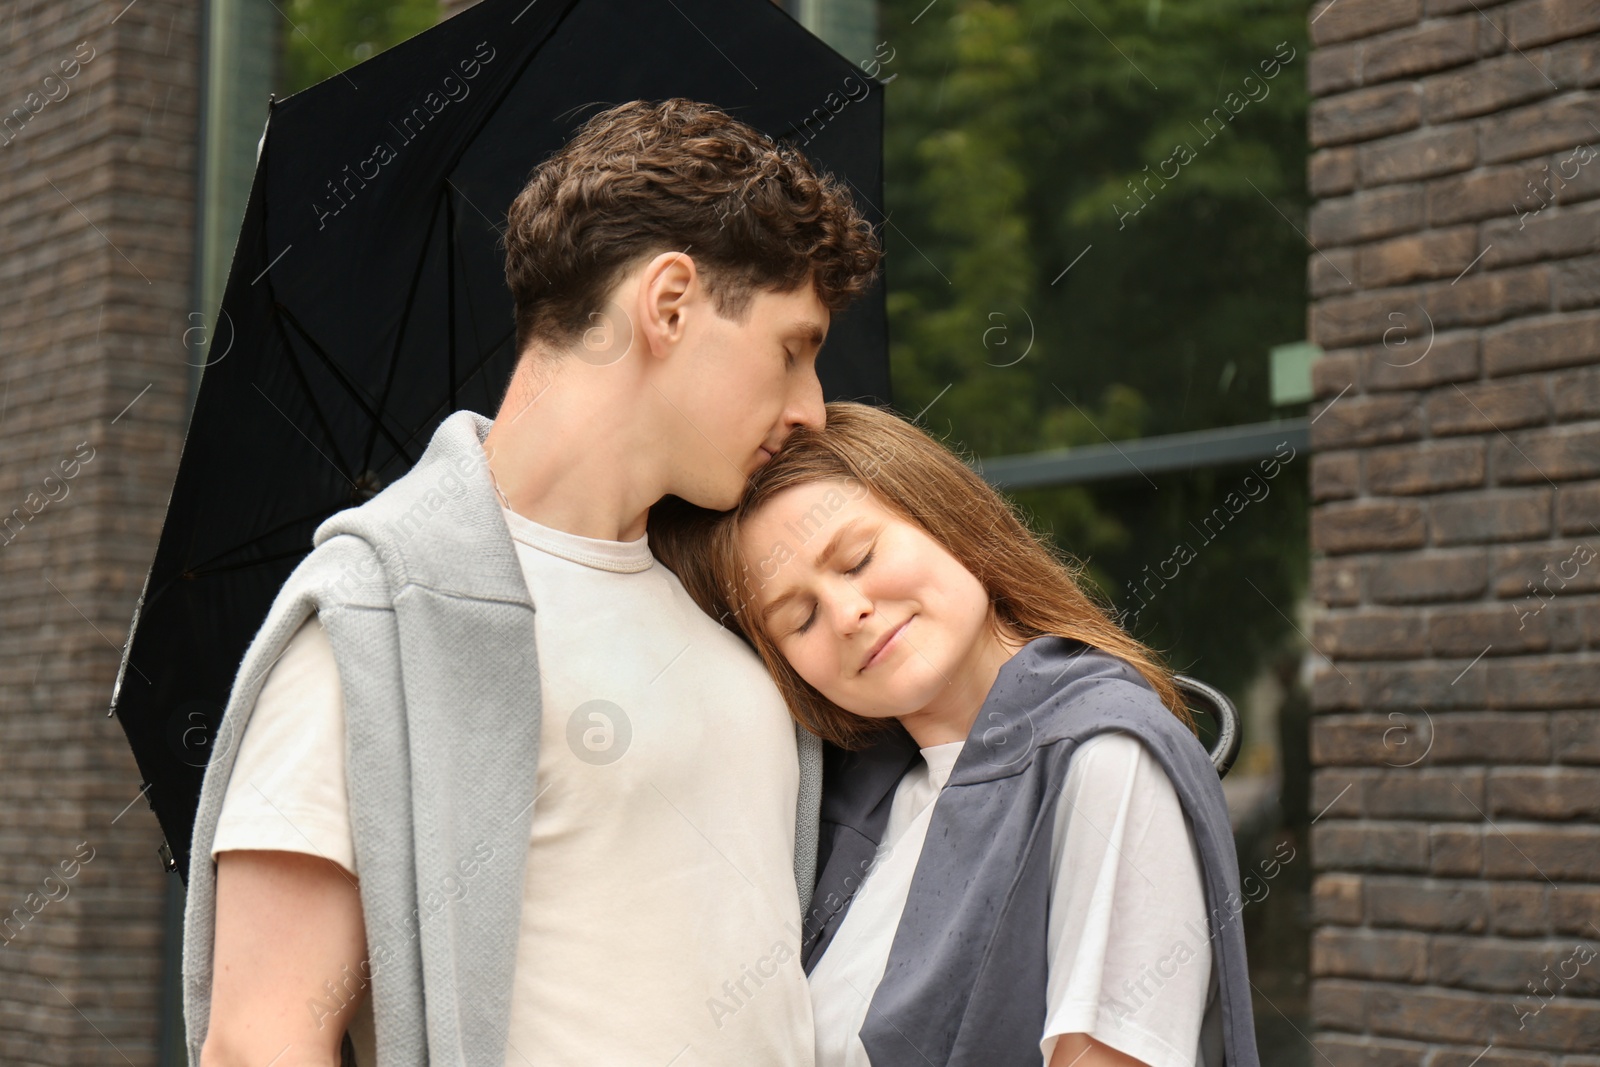 Photo of International dating. Lovely young couple with umbrella spending time together outdoors